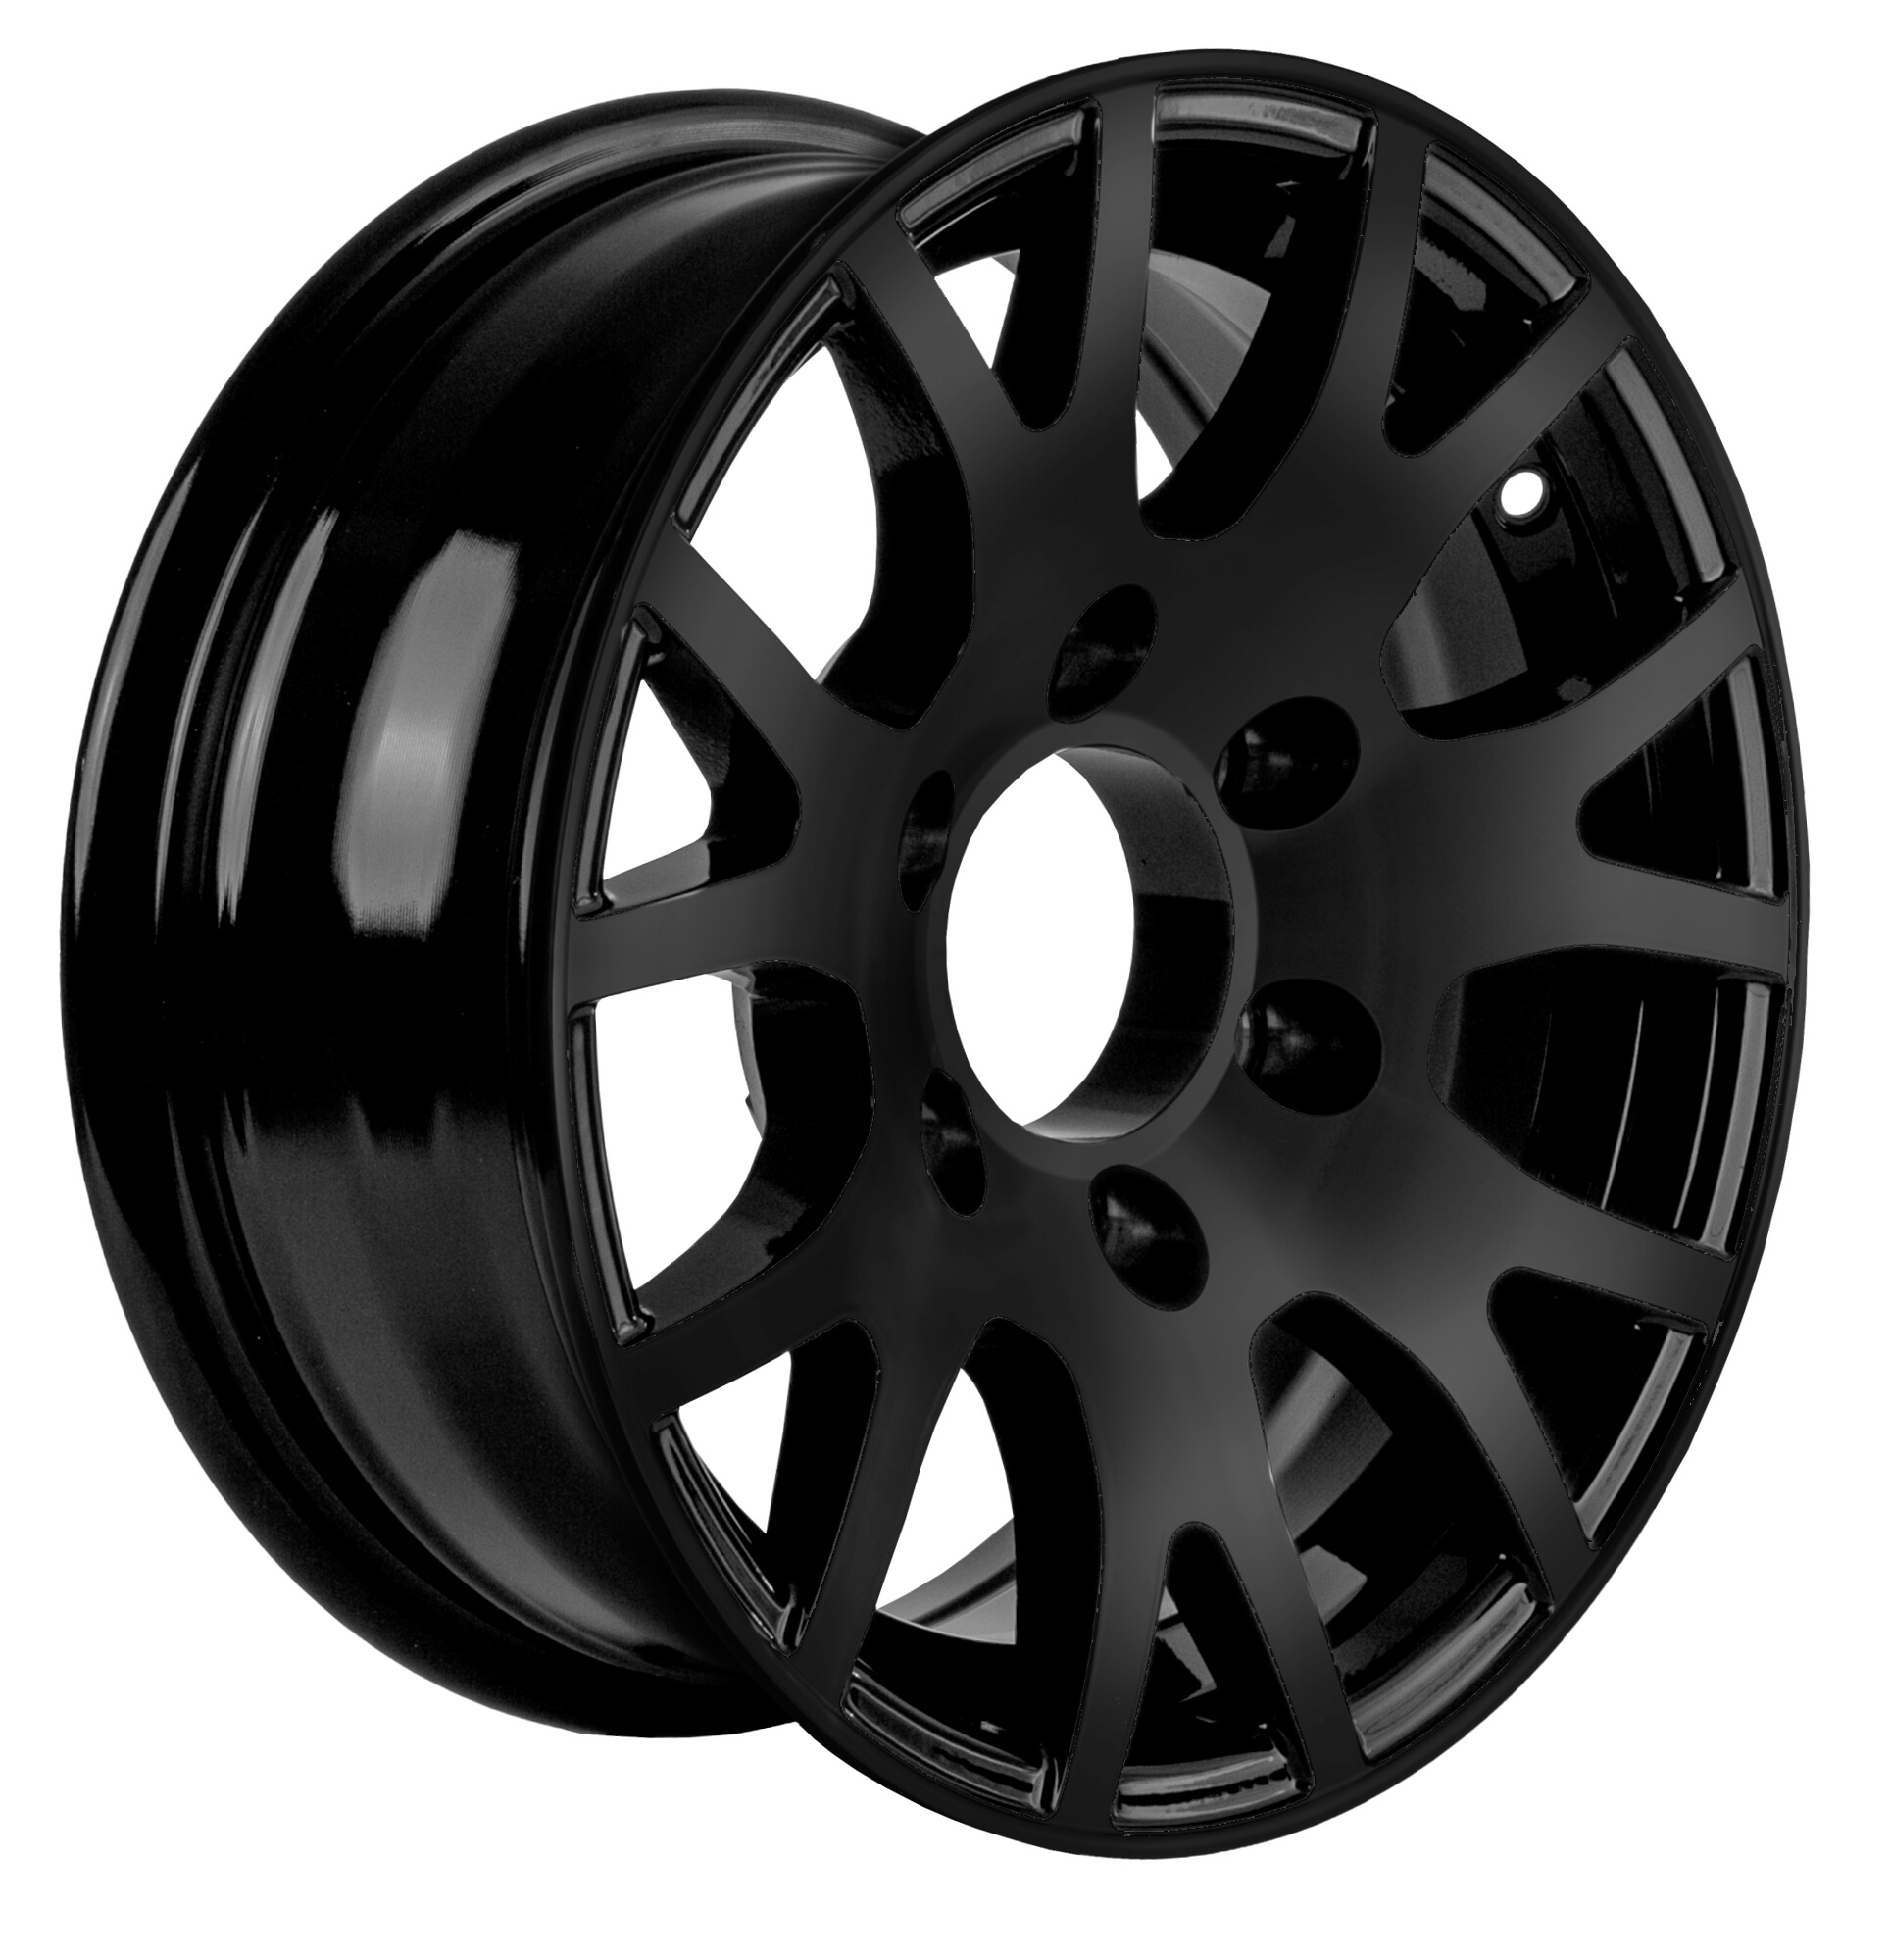 Exclusive new RV/boat trailer wheels with beautiful aesthetics and superior performance for today’s market